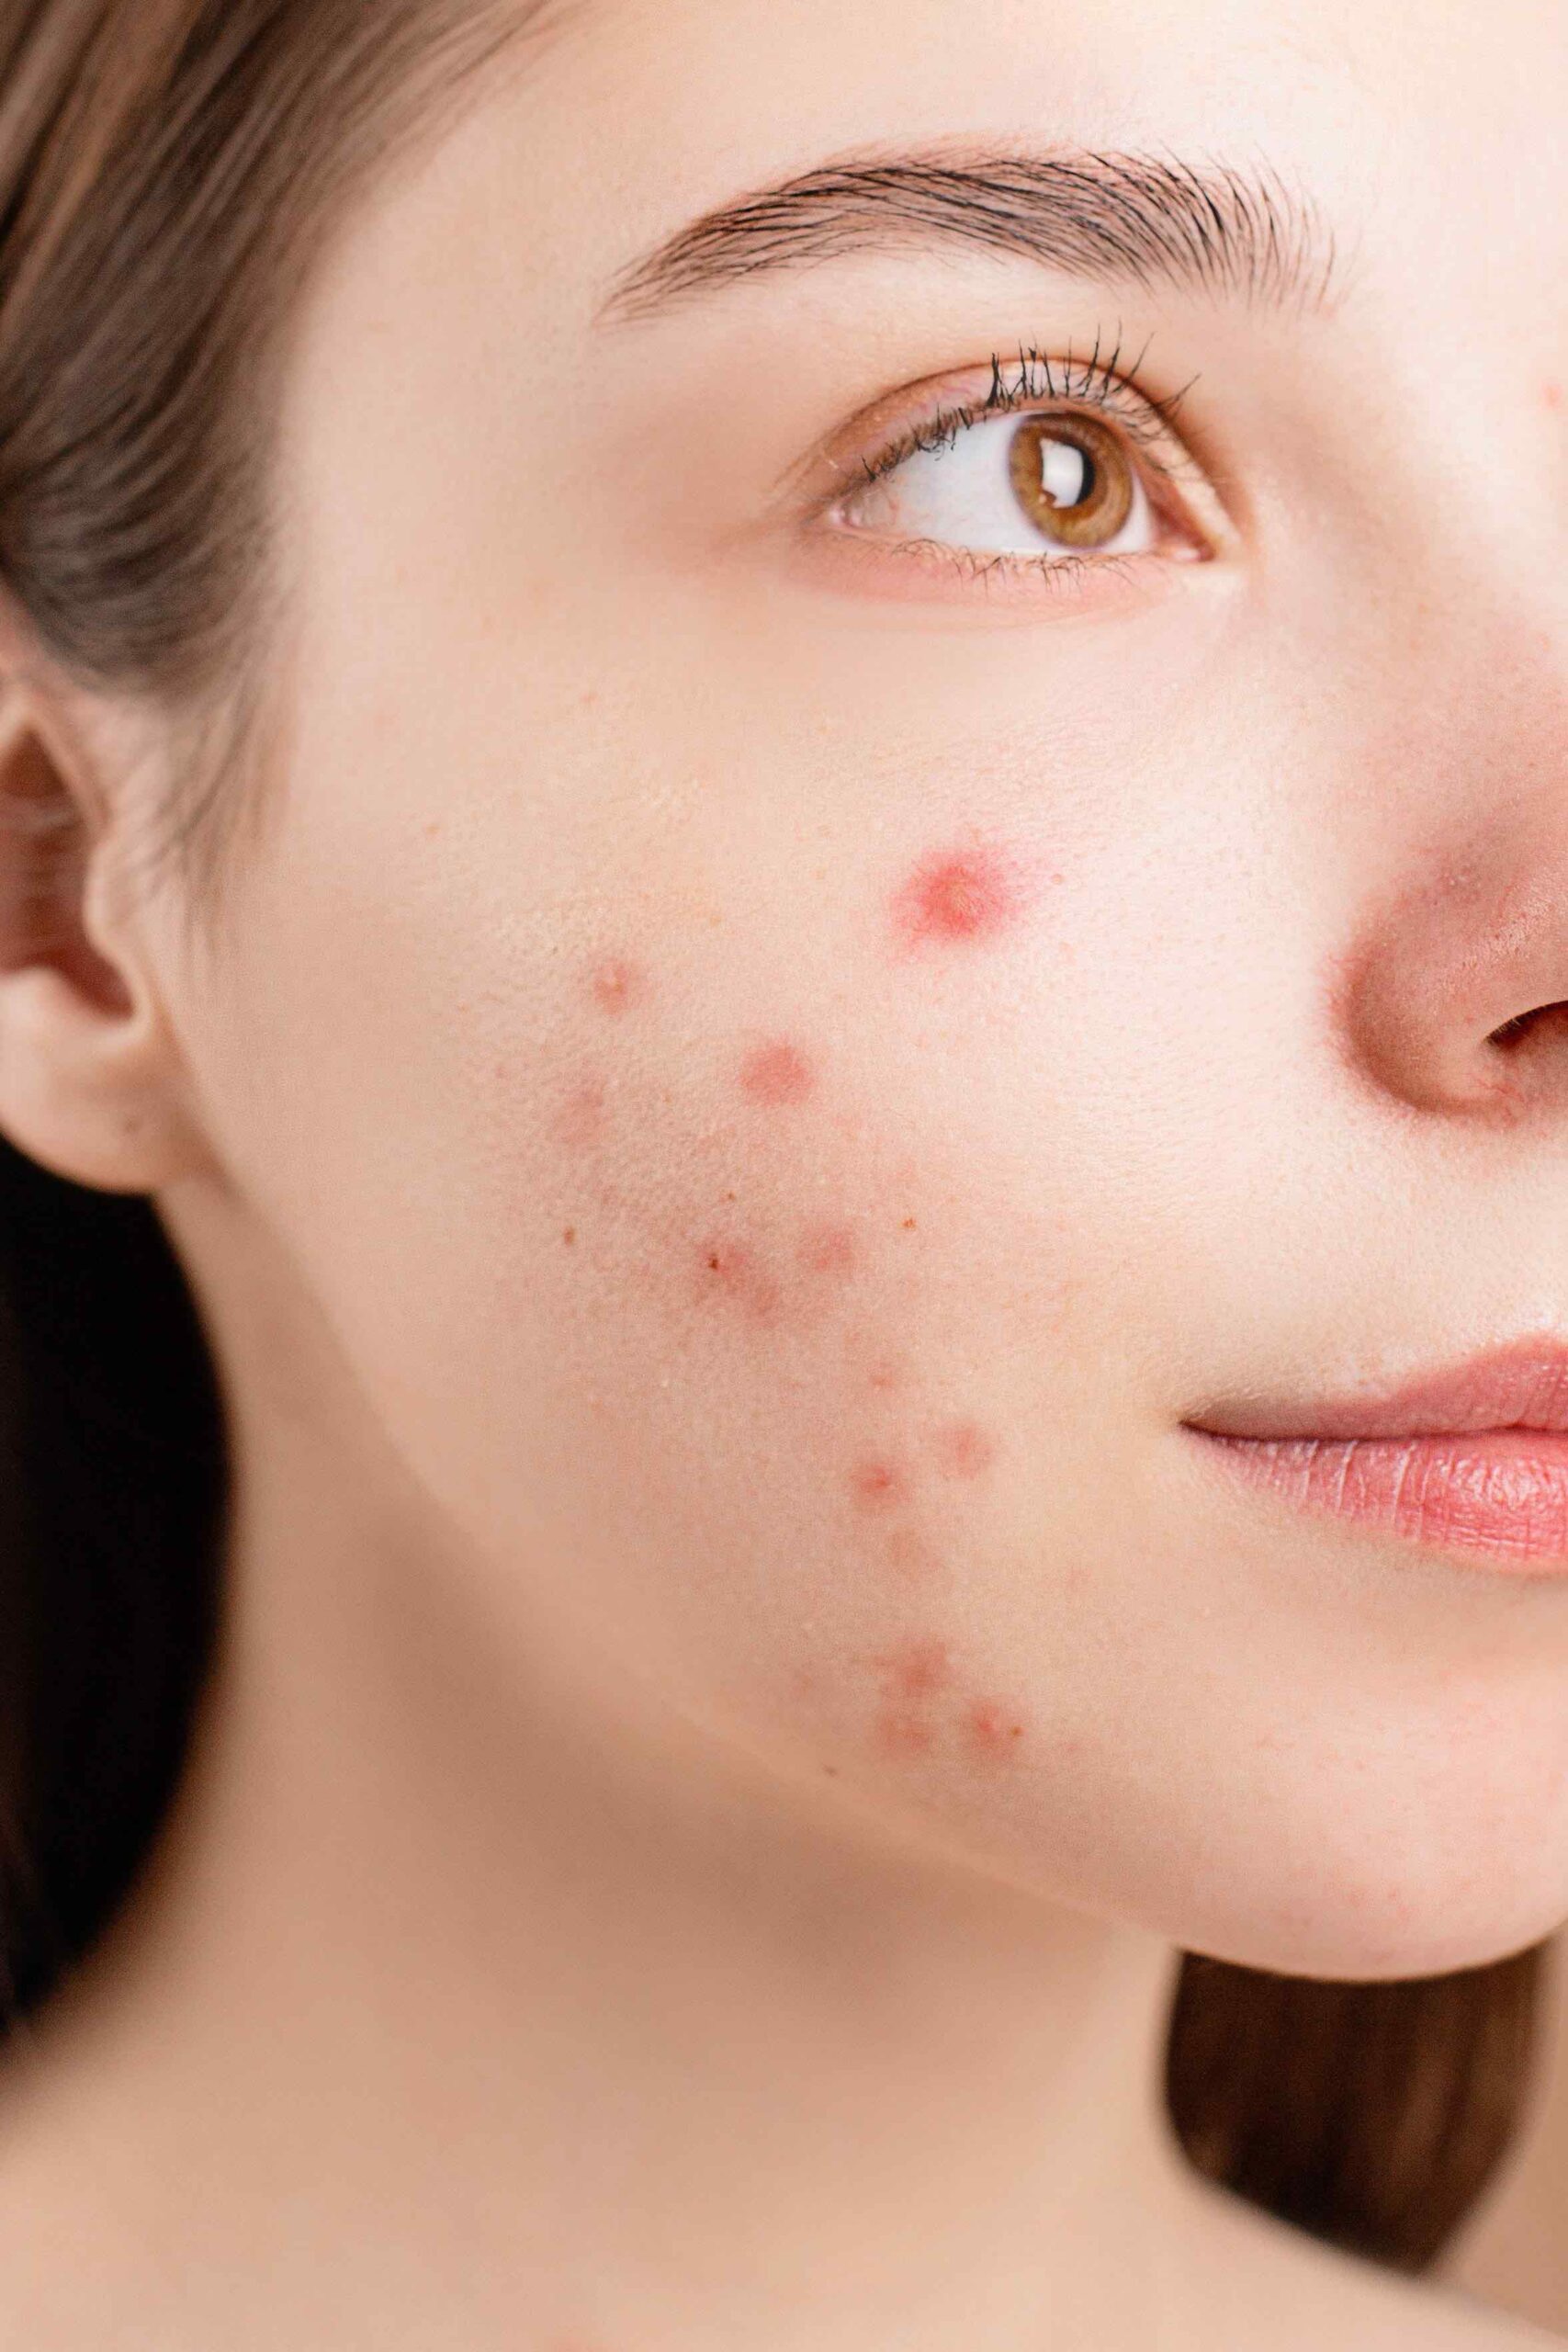 girl with moderate acne on her right cheek